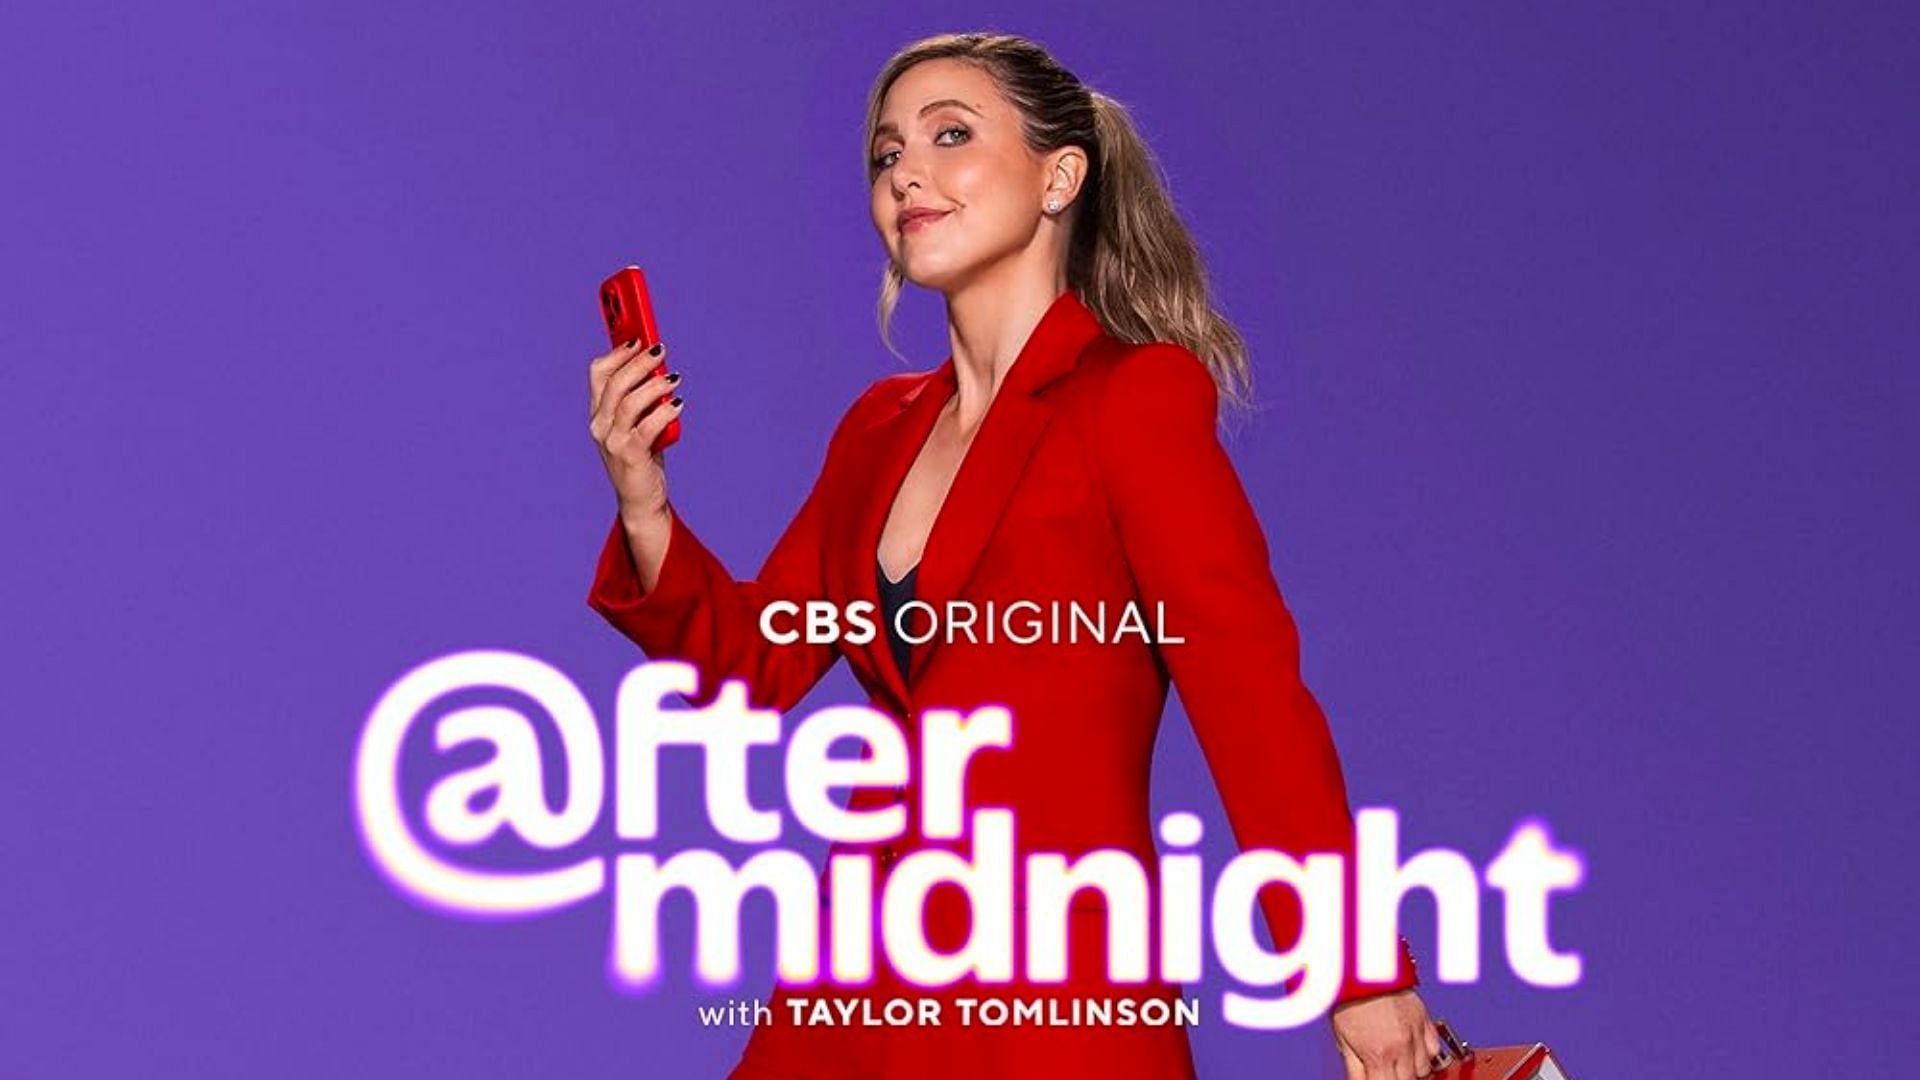 Tomlinson hosts a late-night show called After Midnight (Image via CBS)